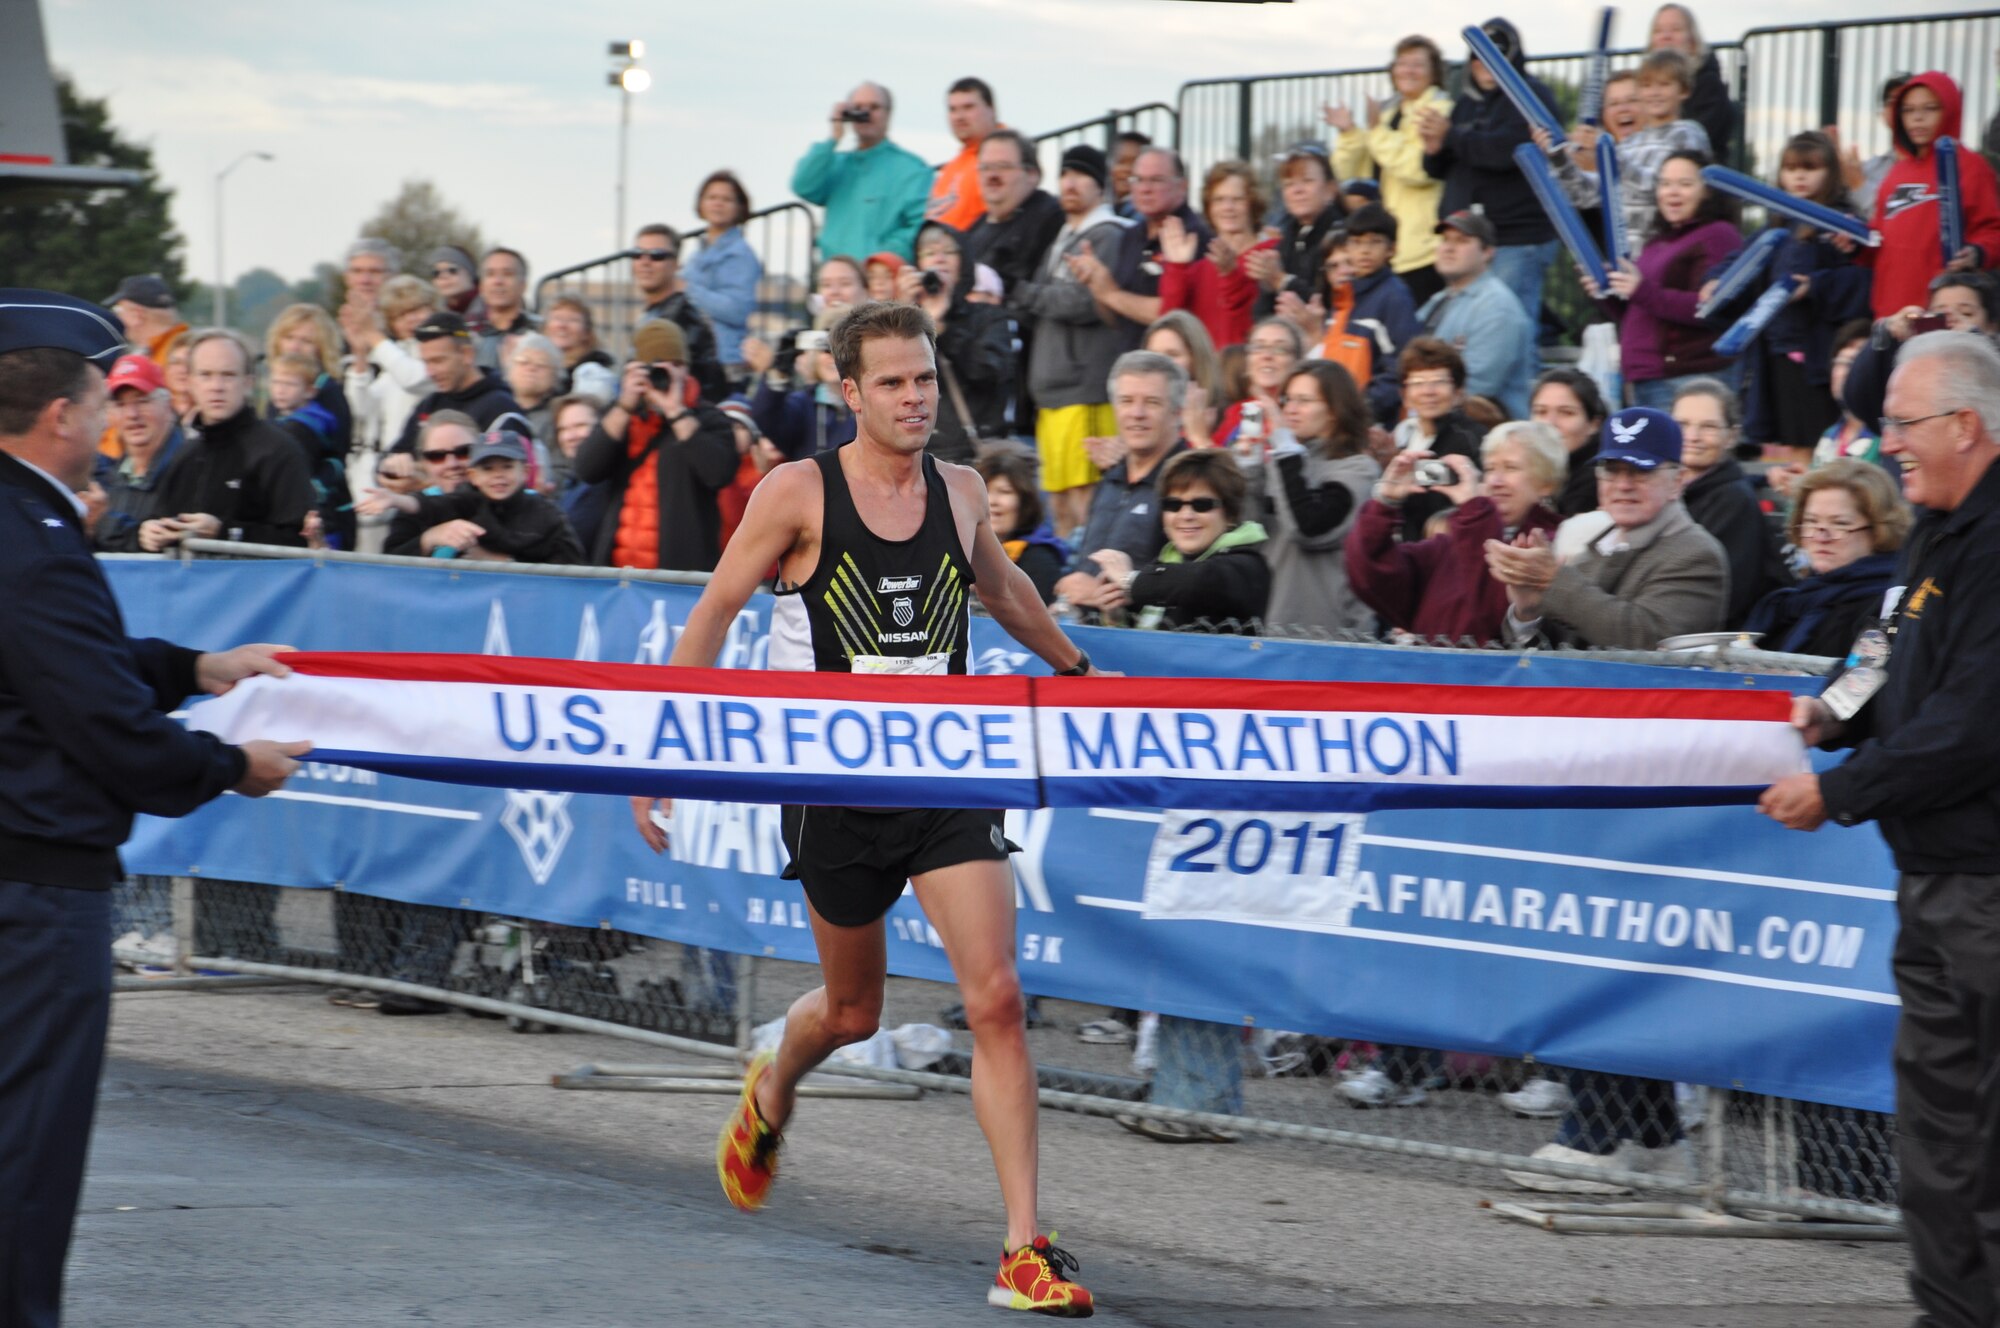 Josh Cox, current course record holder for the full USAF Marathon, finishes first in the 10k race at the 2011 USAF Marathon.  Cox not only finished first, but also set a new course record for the 10k at 31:09.  (US Air Force Photo by Ted Theopolos)